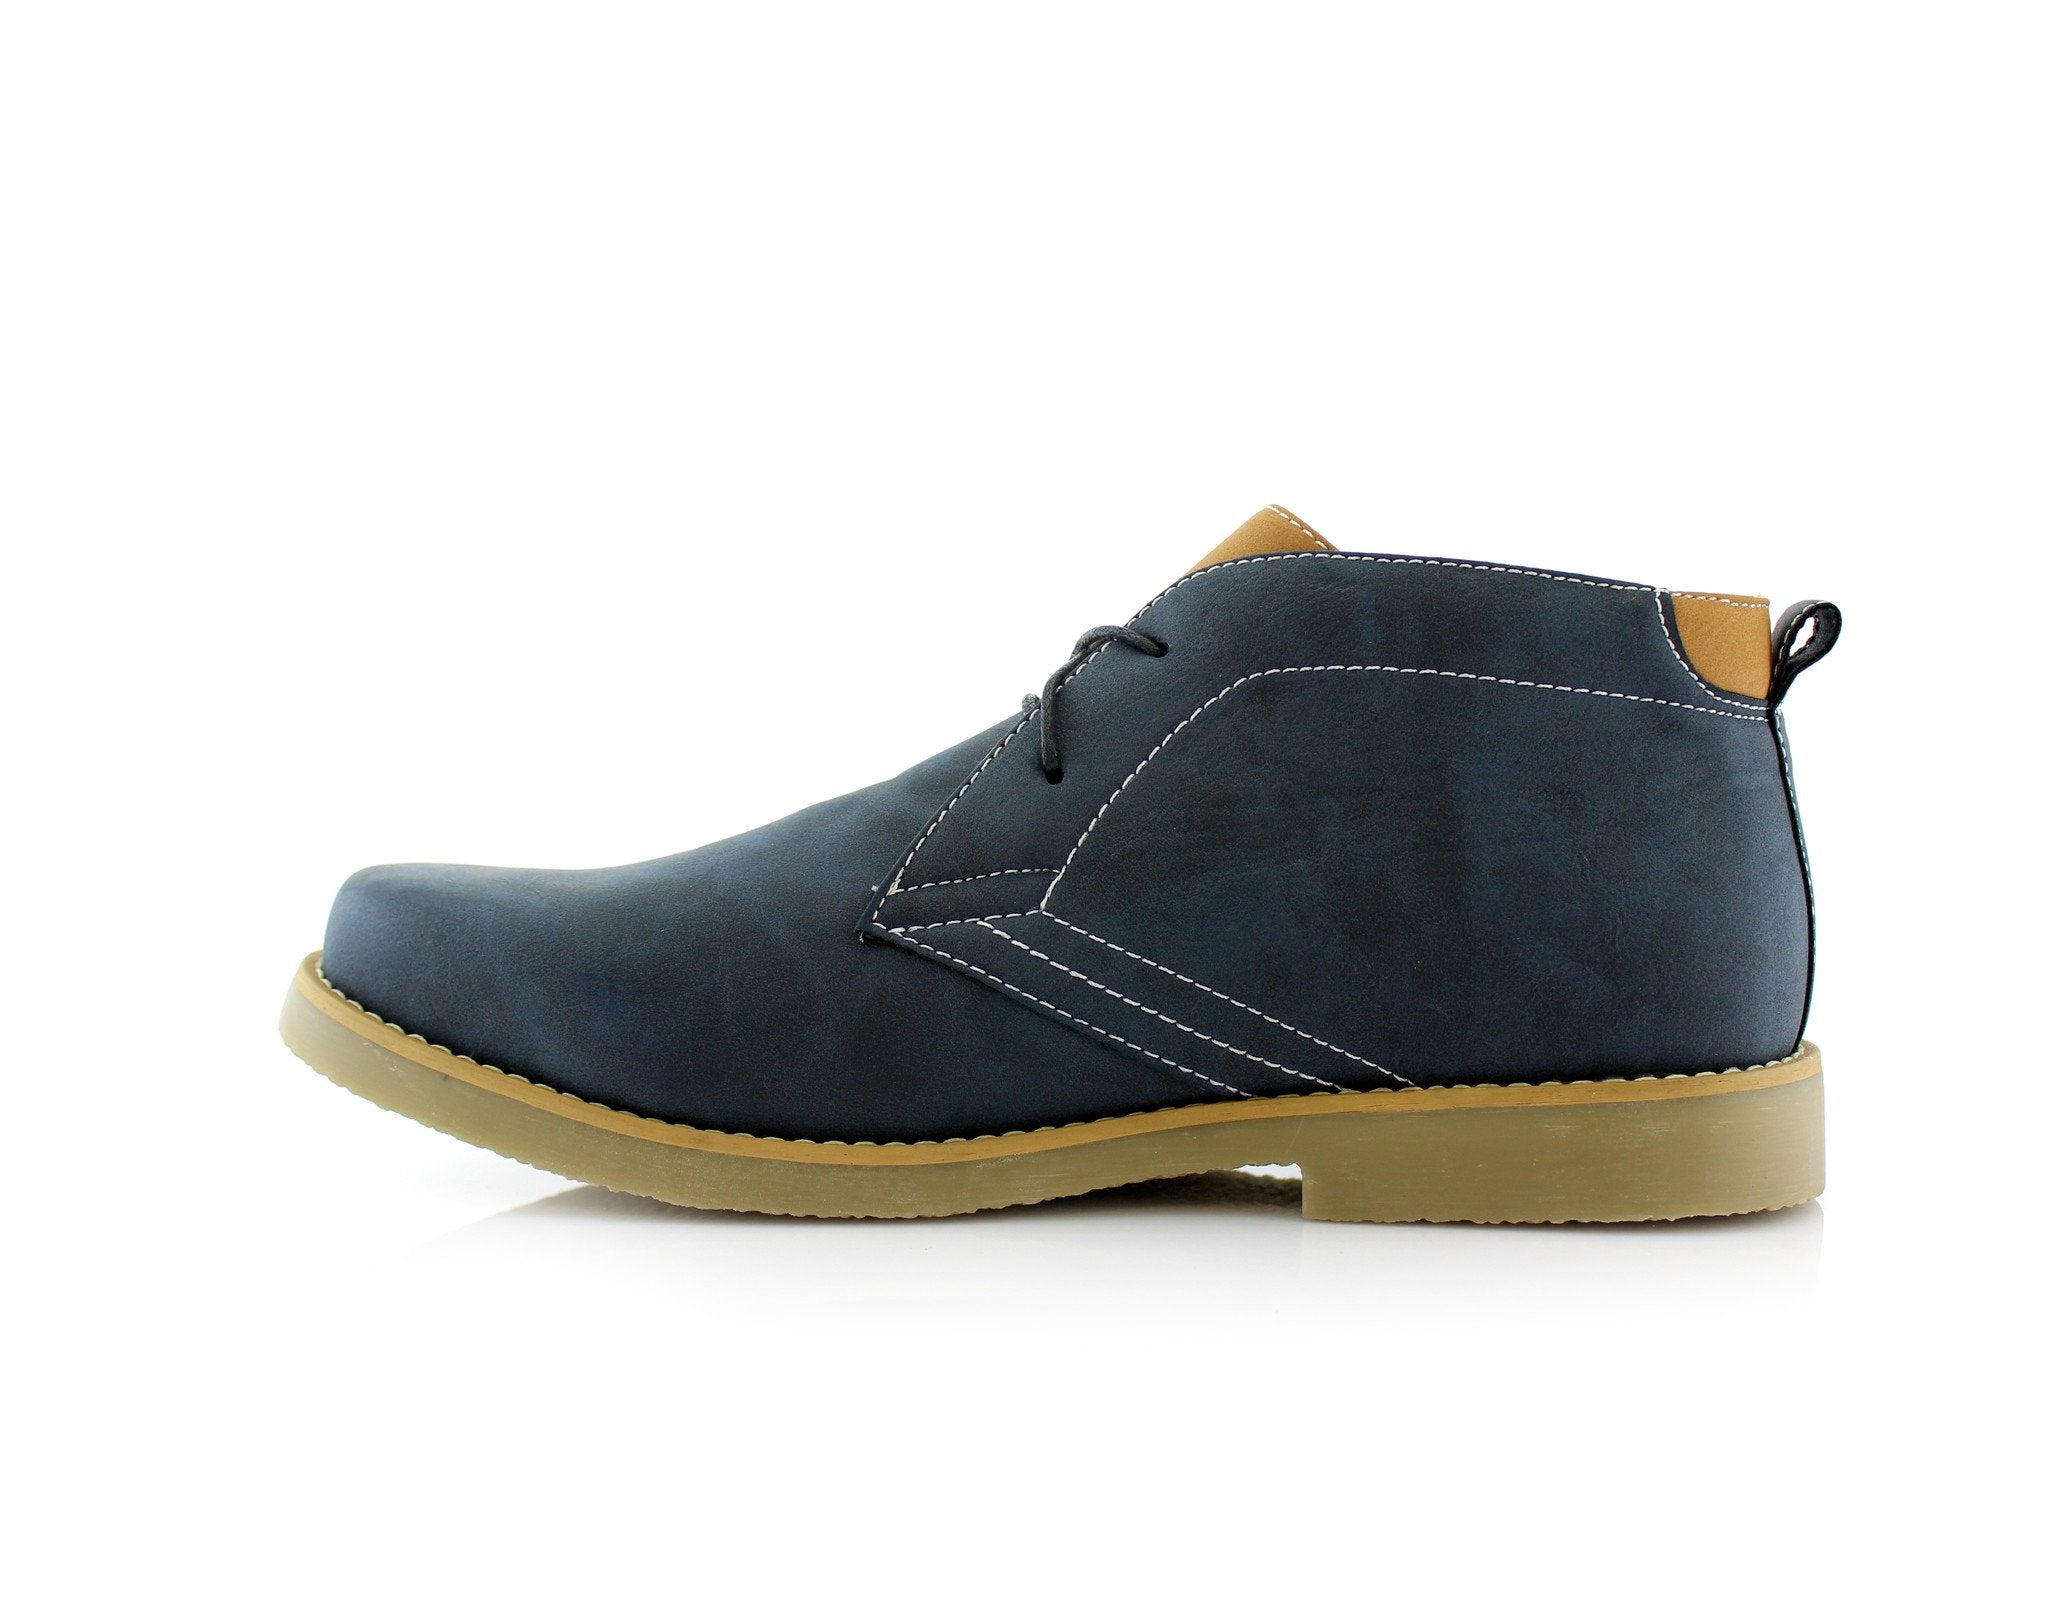 Classic Chukka Boots | Elliot by Polar Fox | Conal Footwear | Inner Side Angle View